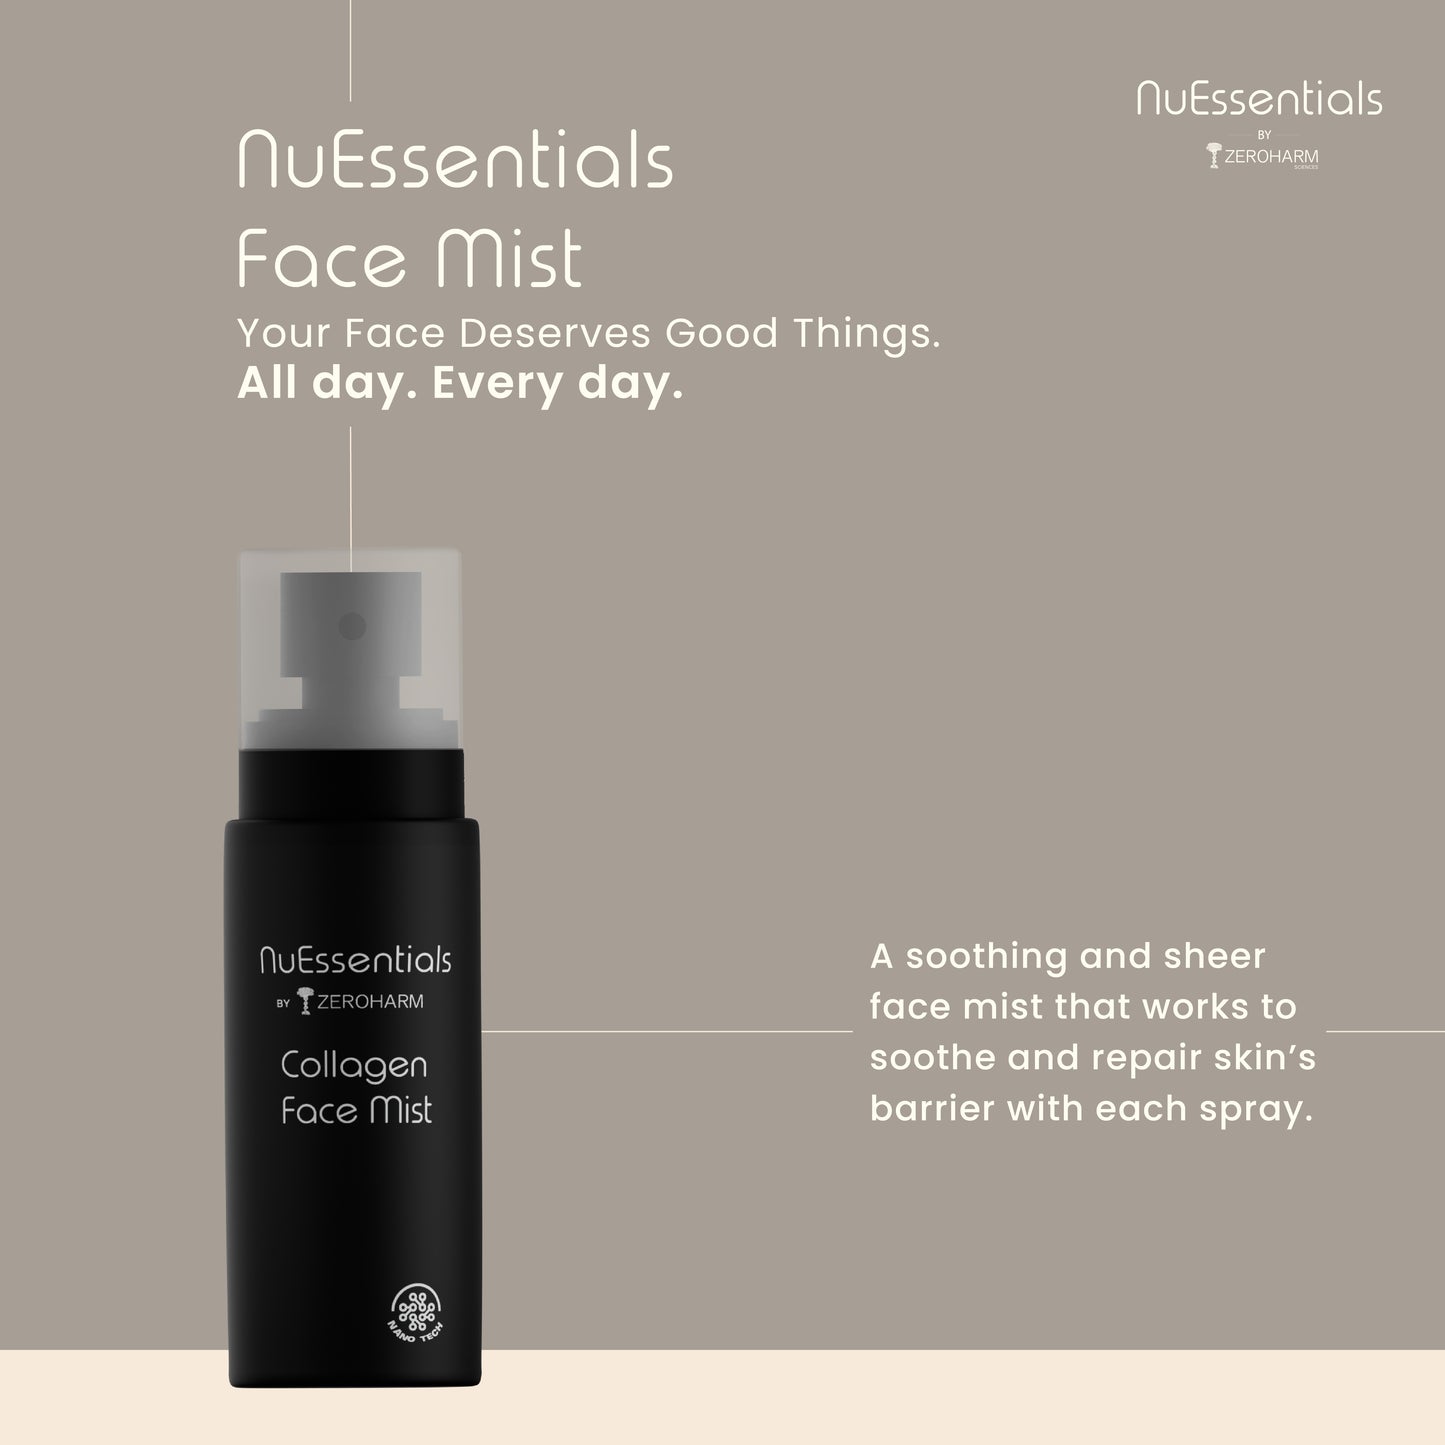 NuEssentials Face Mist